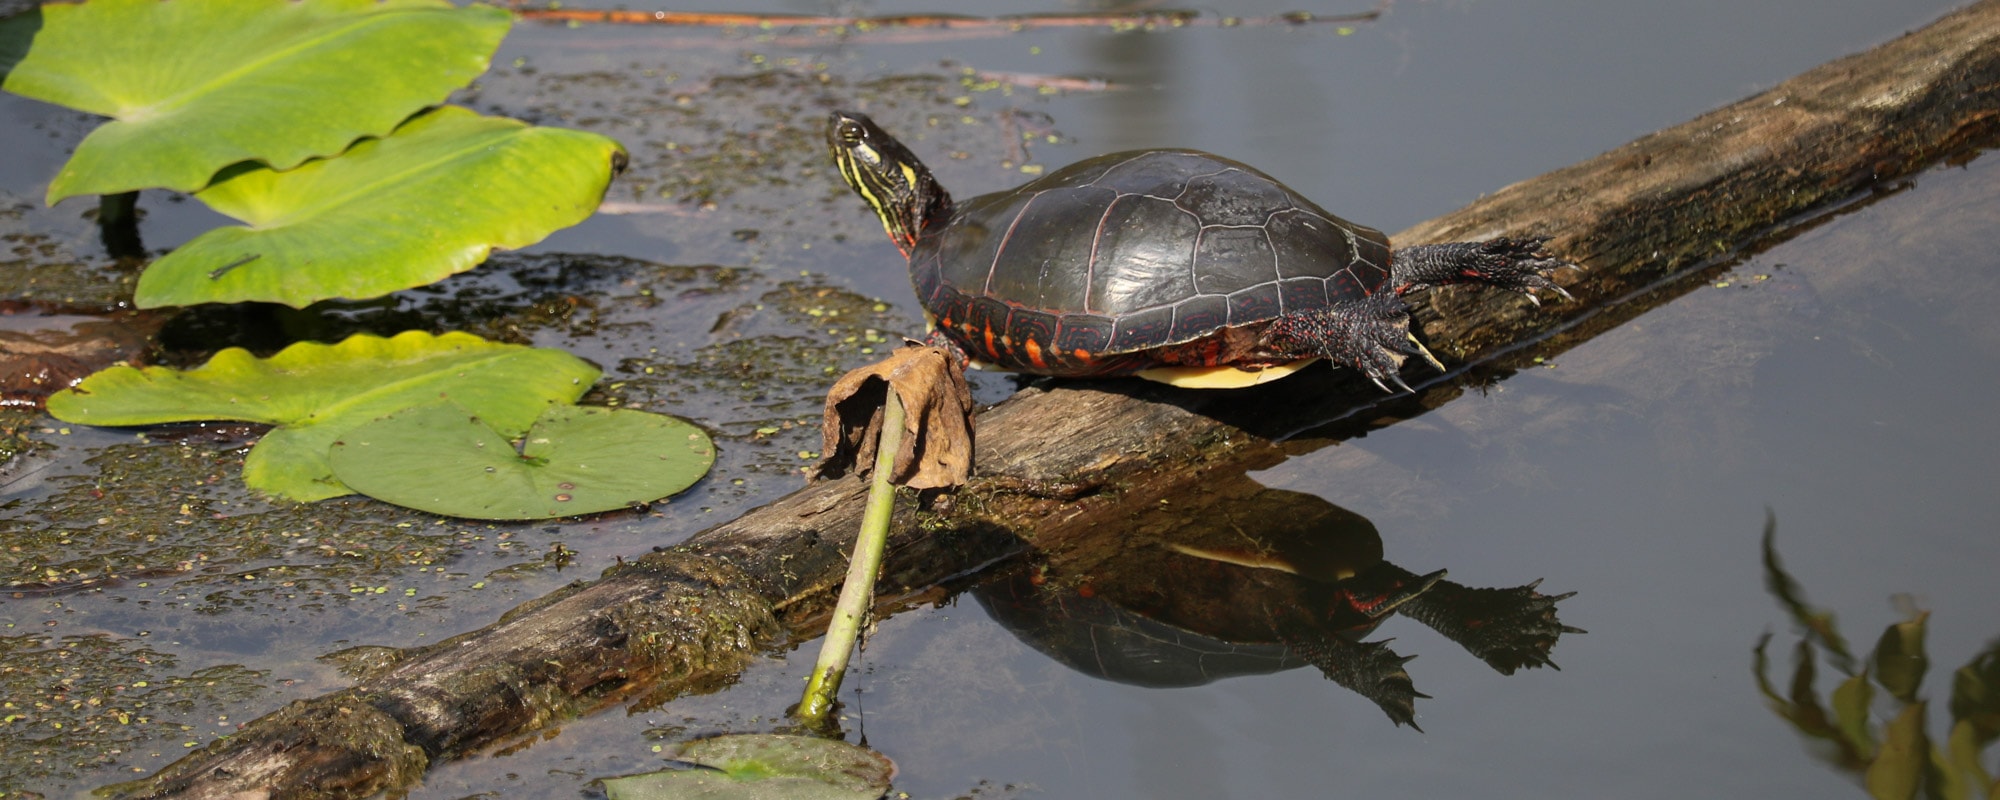 Cuyahoga Valley National Park - Banner Turtle